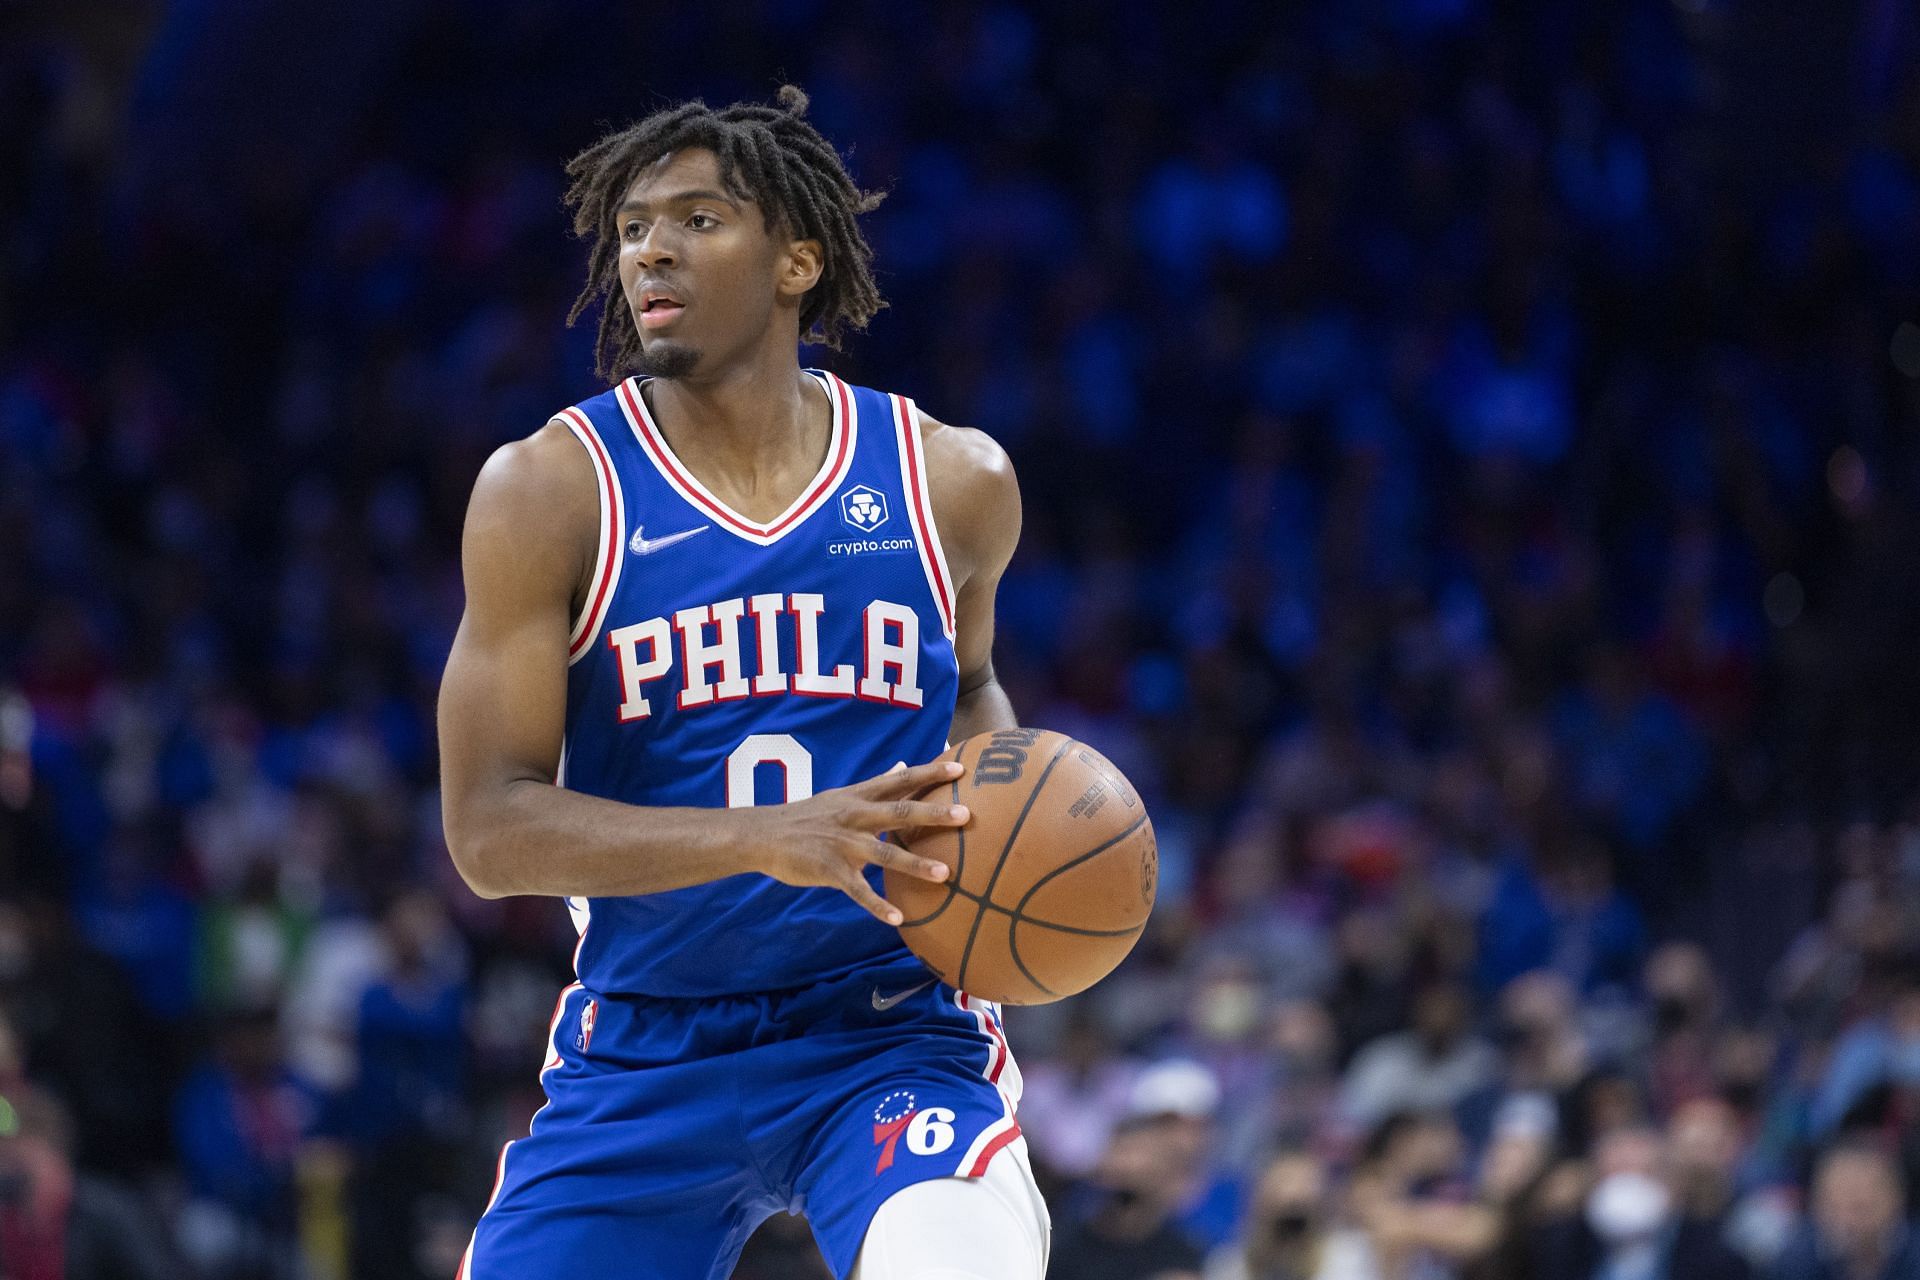 Tyrese Maxey #0 of the Philadelphia 76ers dribbles the ball against the Atlanta Hawks in the first half at the Wells Fargo Center on October 30, 2021 in Philadelphia, Pennsylvania. The 76ers defeated the Hawks 122-94